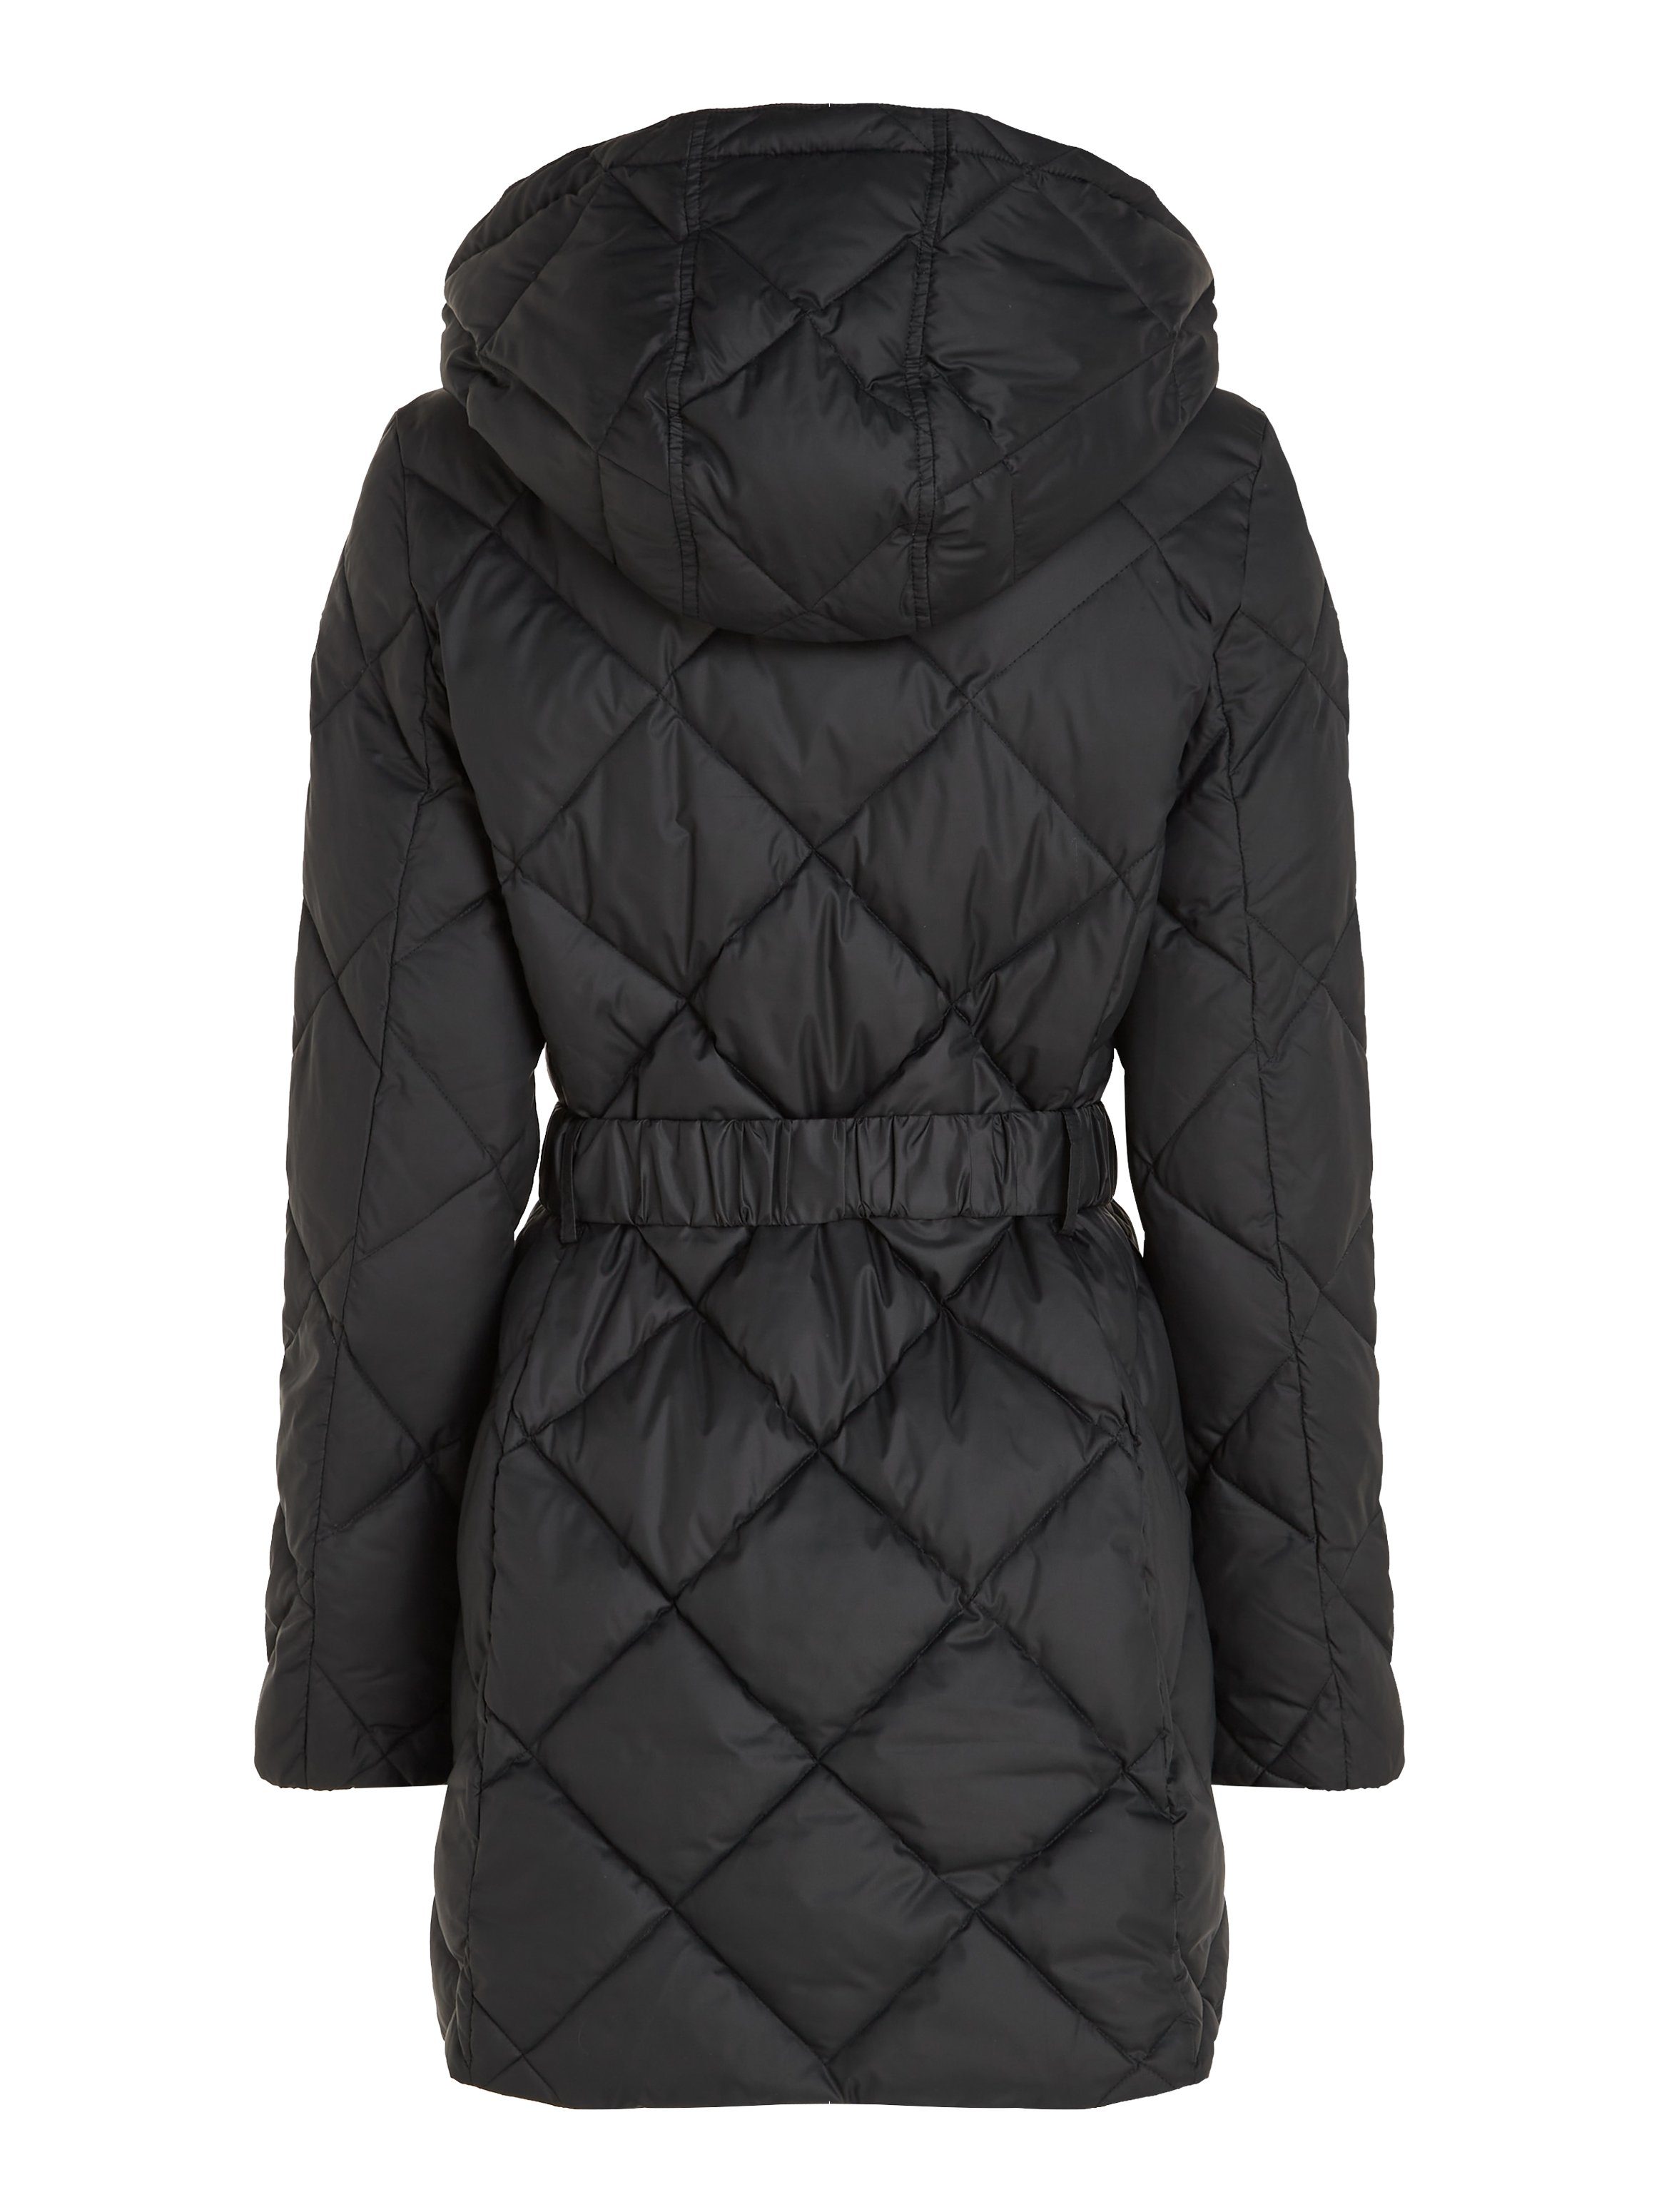 COAT ELEVATED Tommy abnehmbarer Hilfiger mit Kapuze BELTED QUILTED Steppmantel